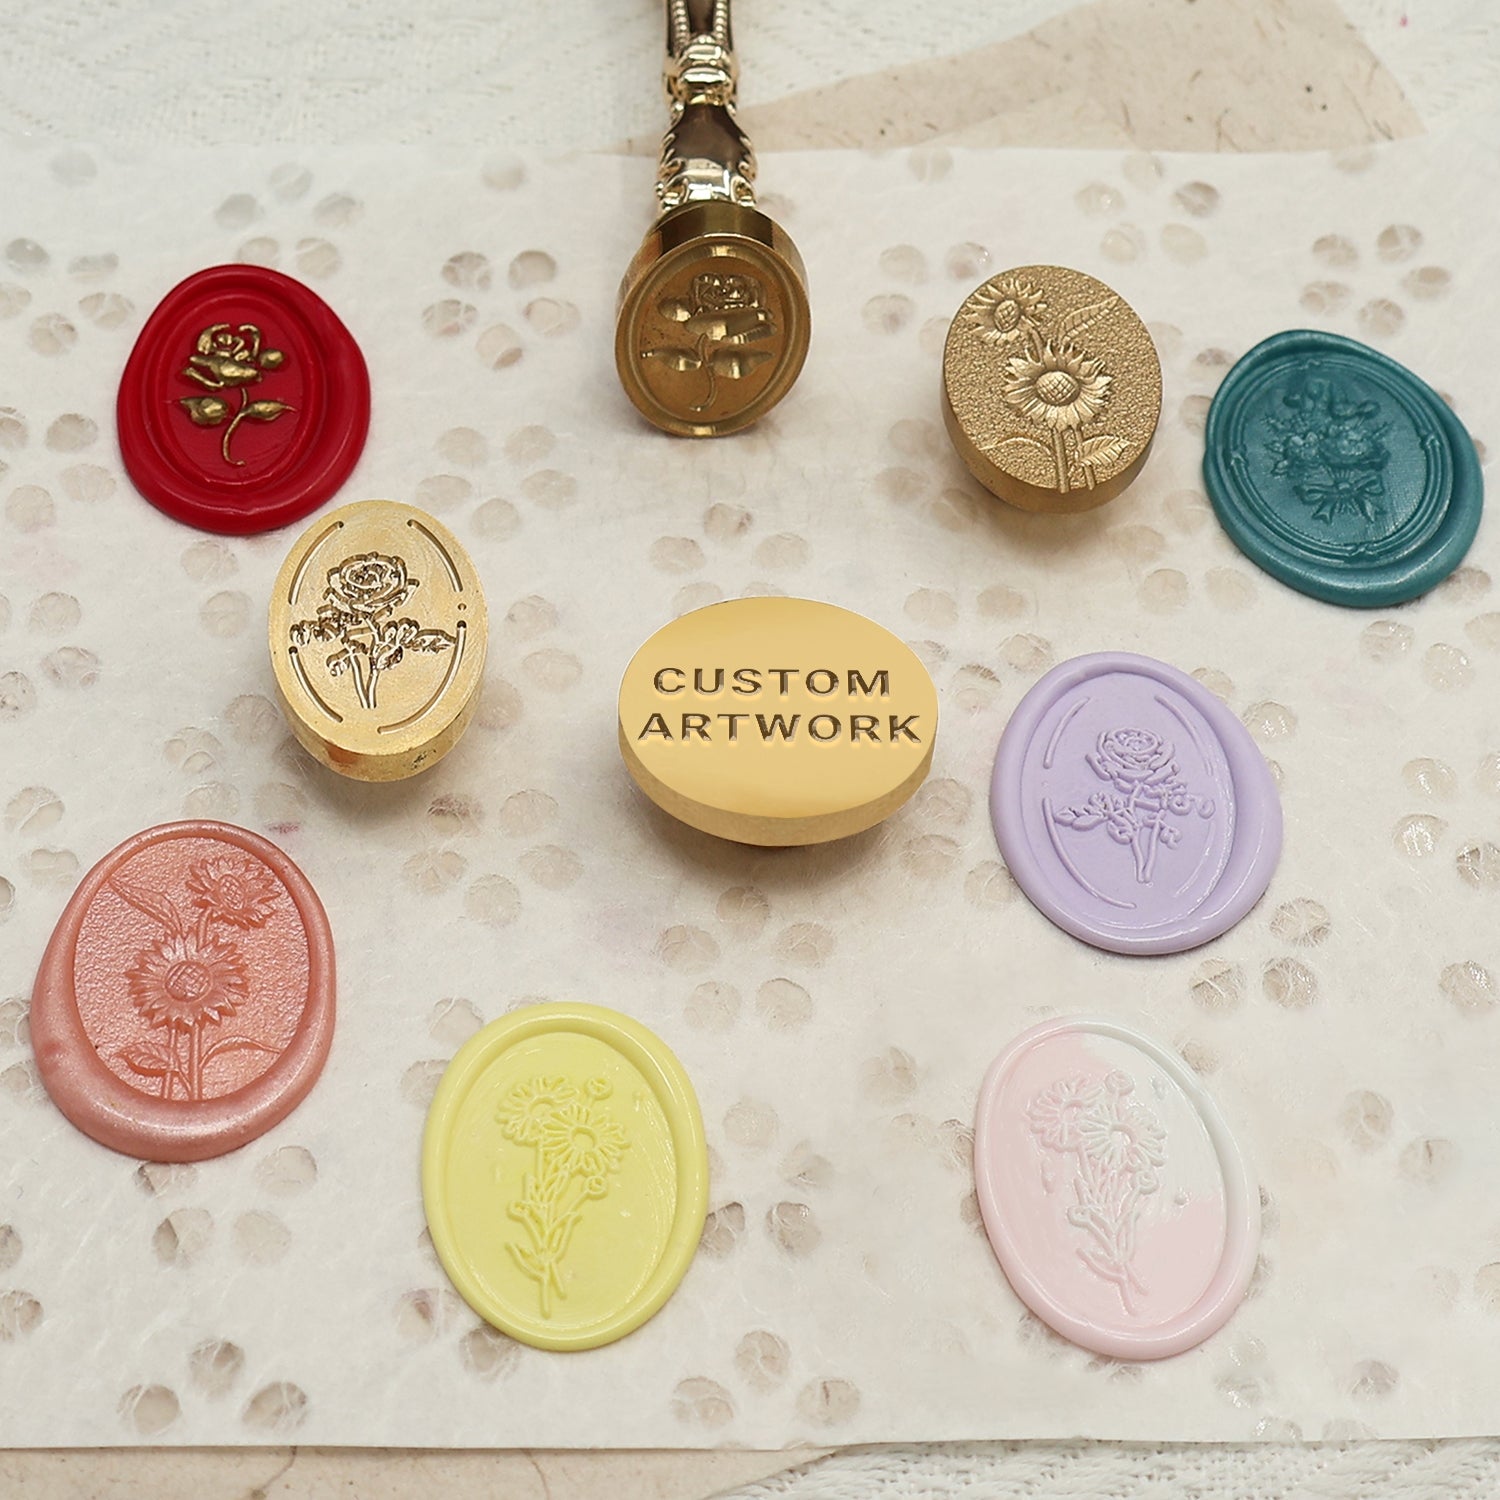 Custom Wax Seal Stamp - Custom Design Oval Wax Seal Stamp with Your Artwork